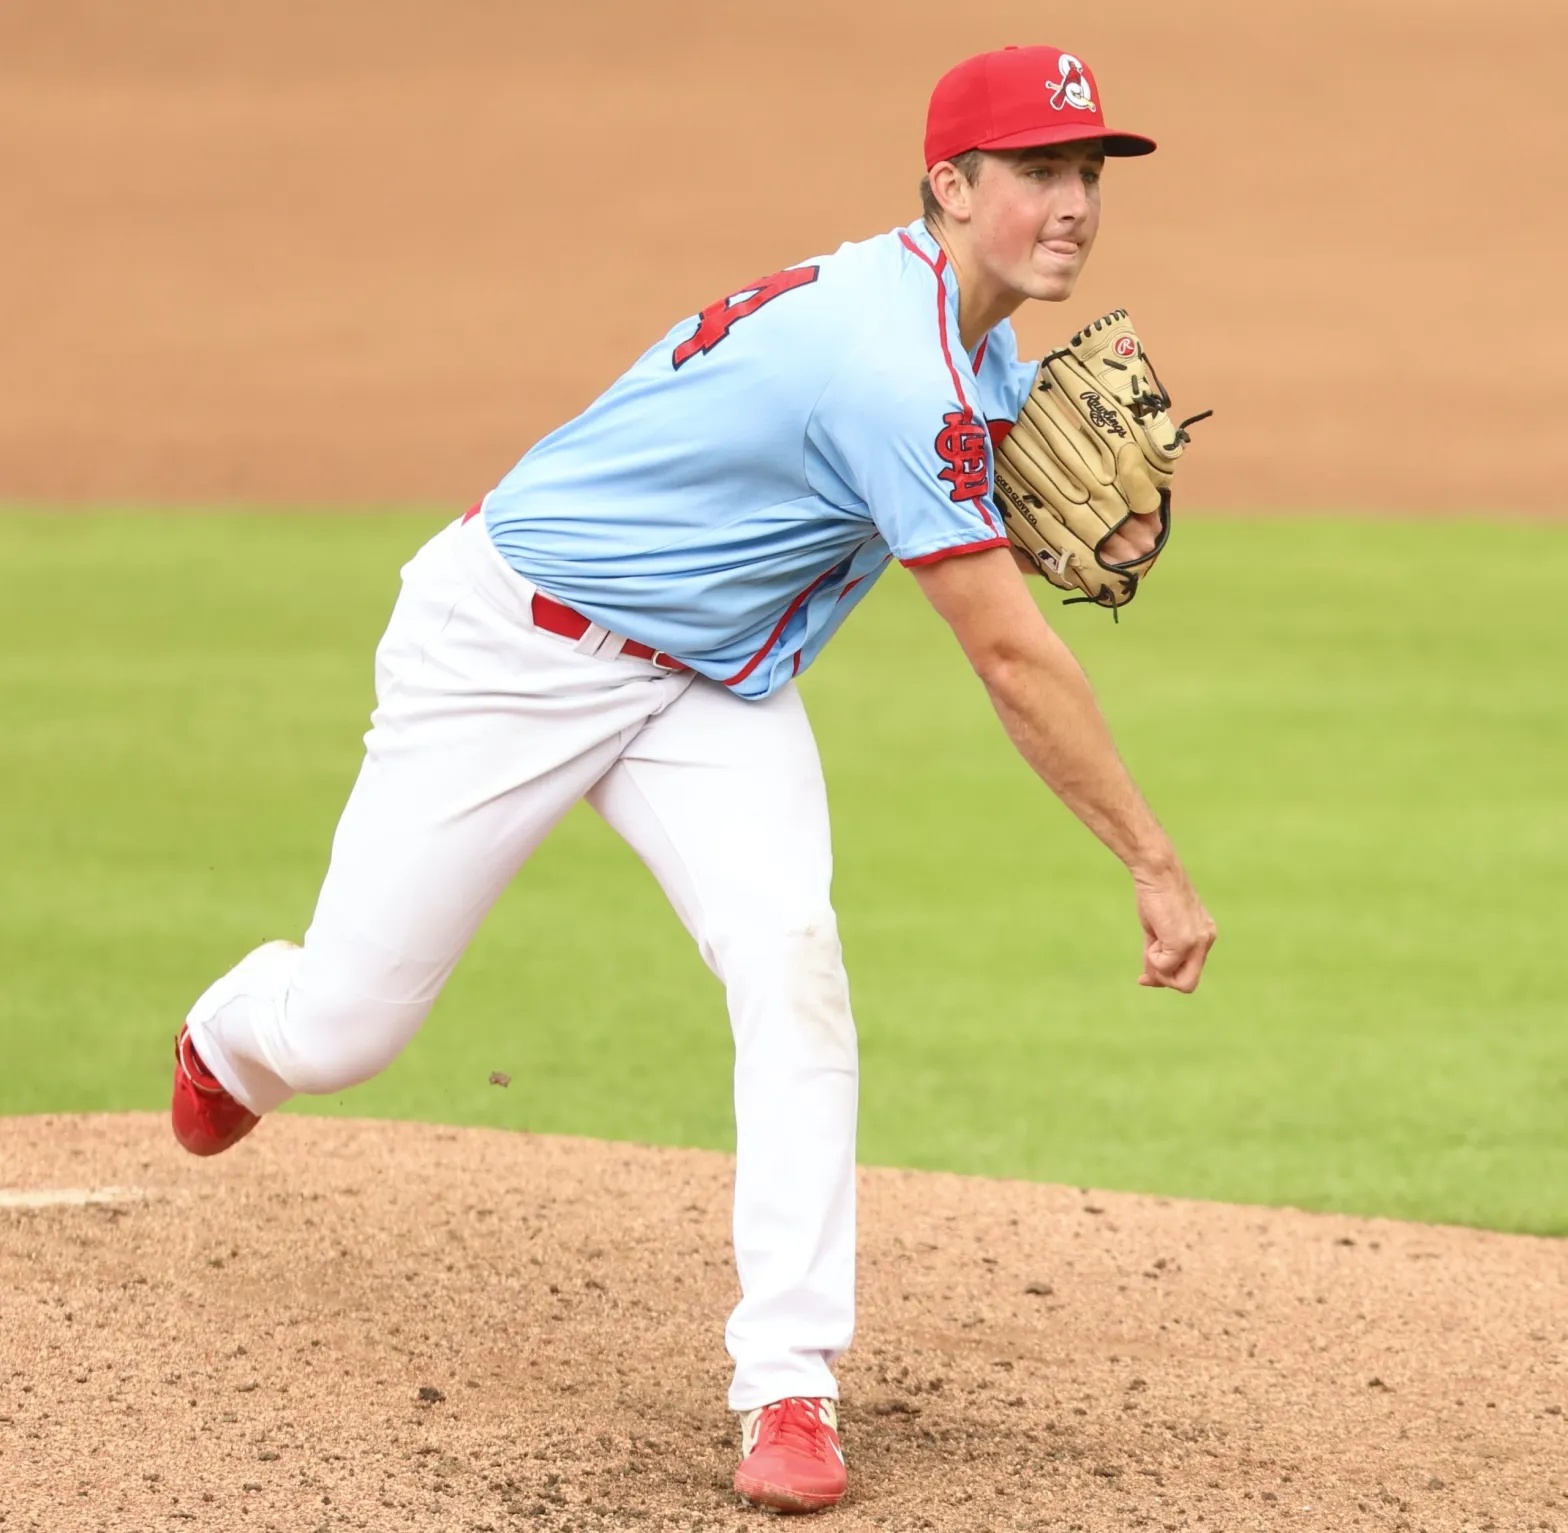 A baseball player in a light blue jersey and red hat pitches the ball